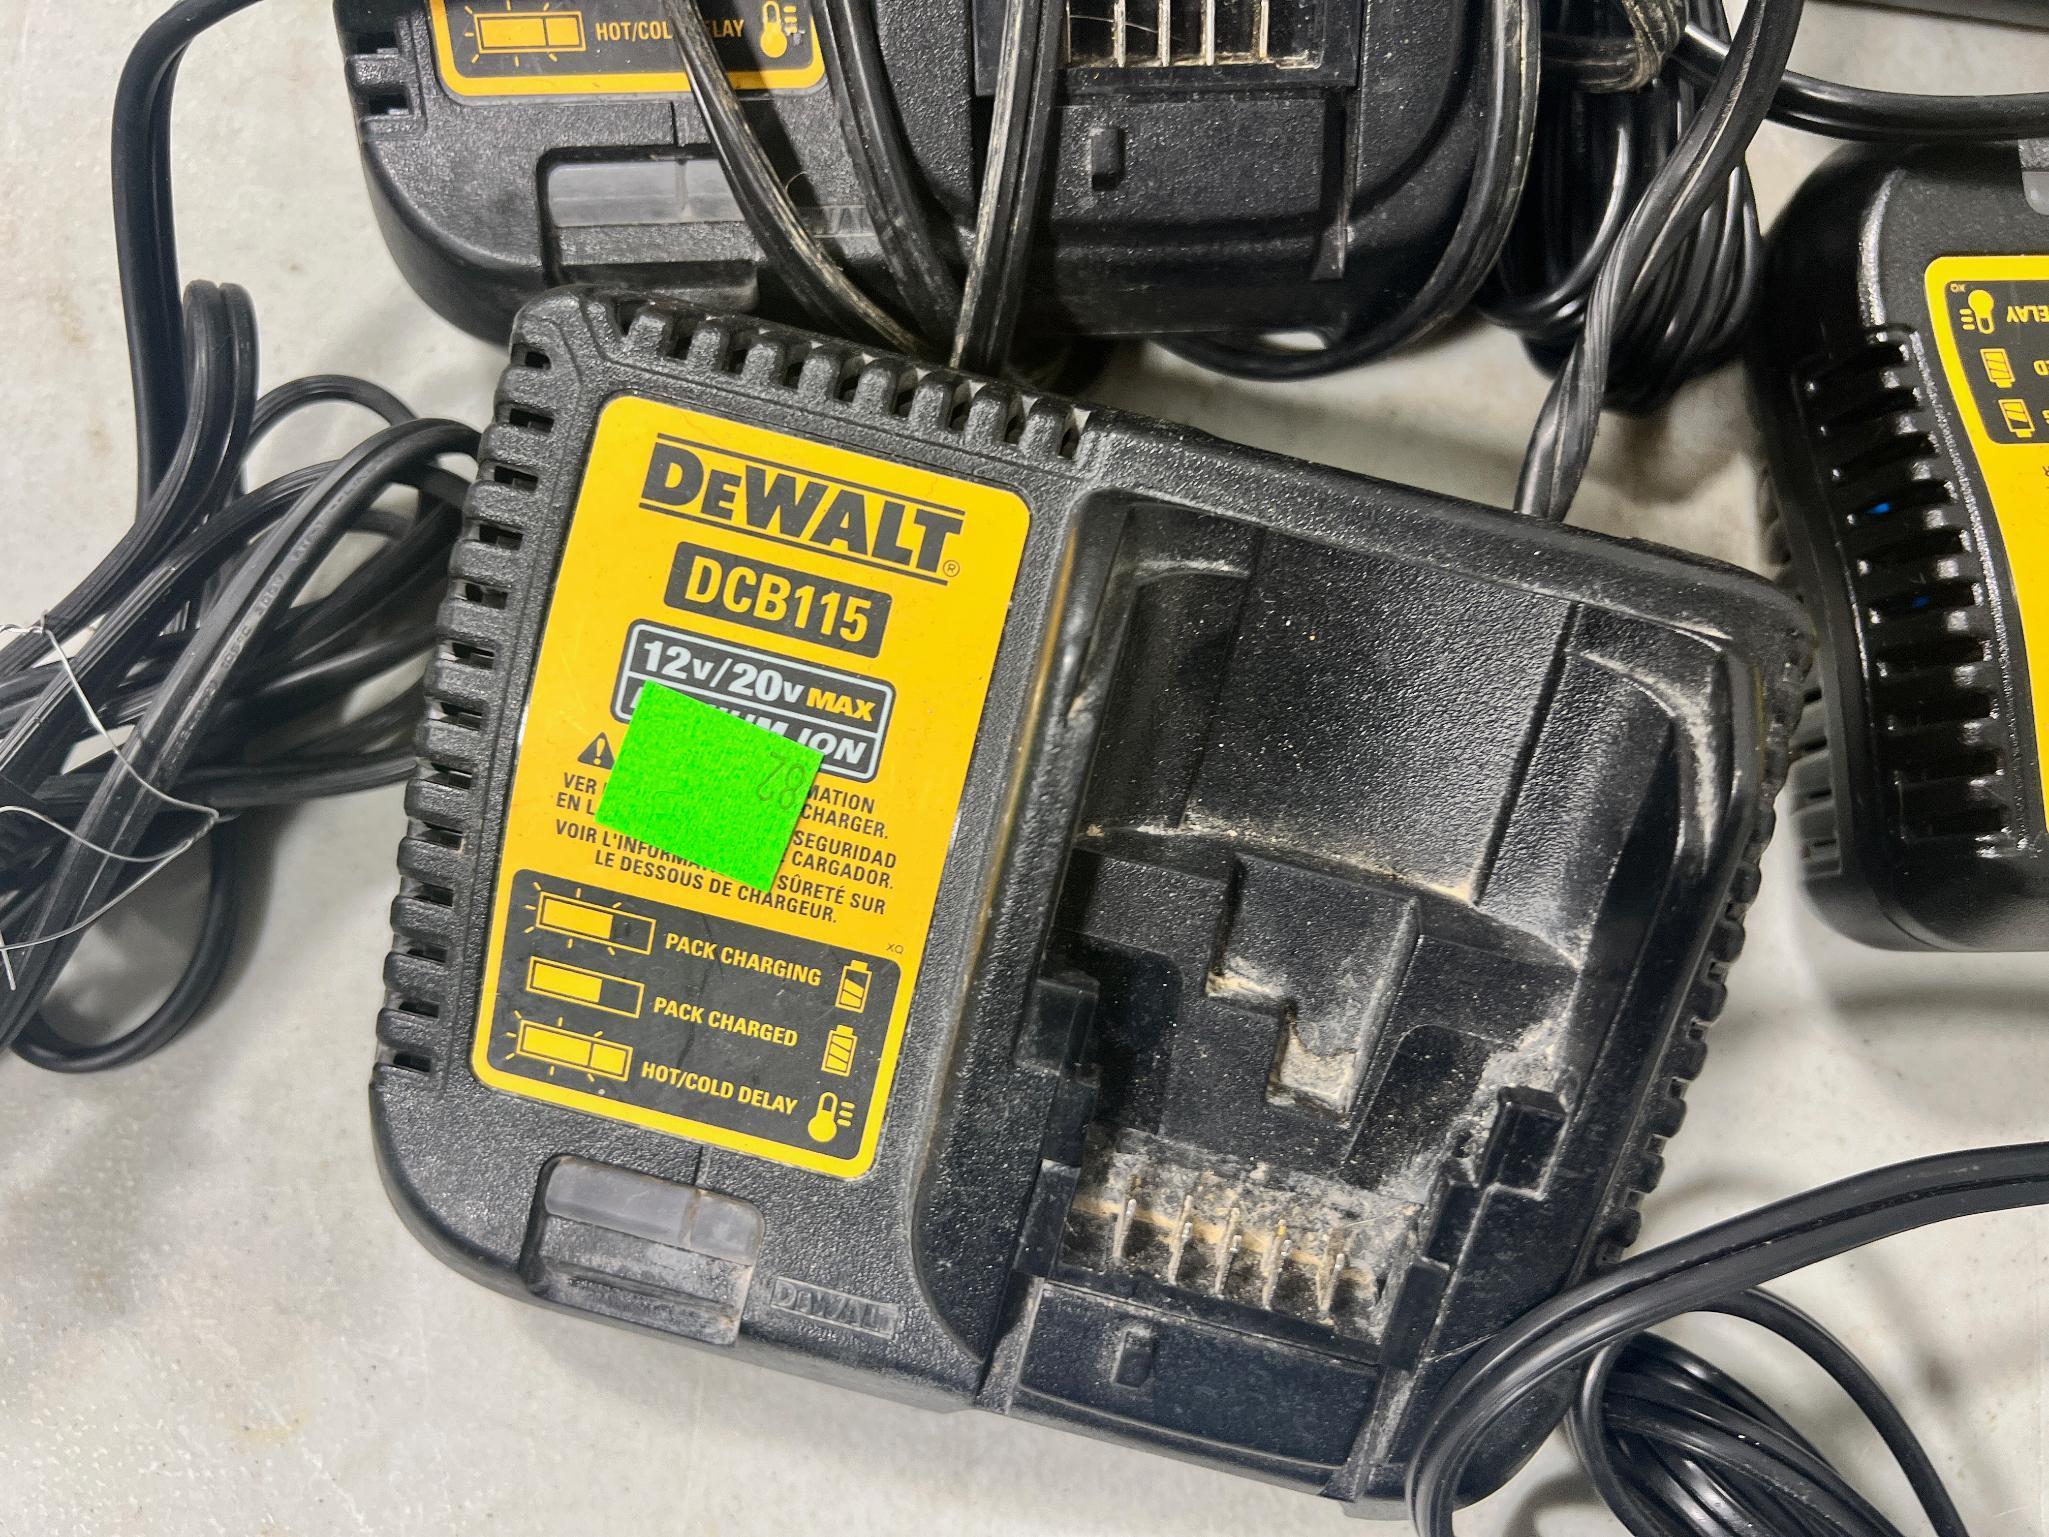 4- Dewalt 20V chargers, 2- DC115 and 2-DC112